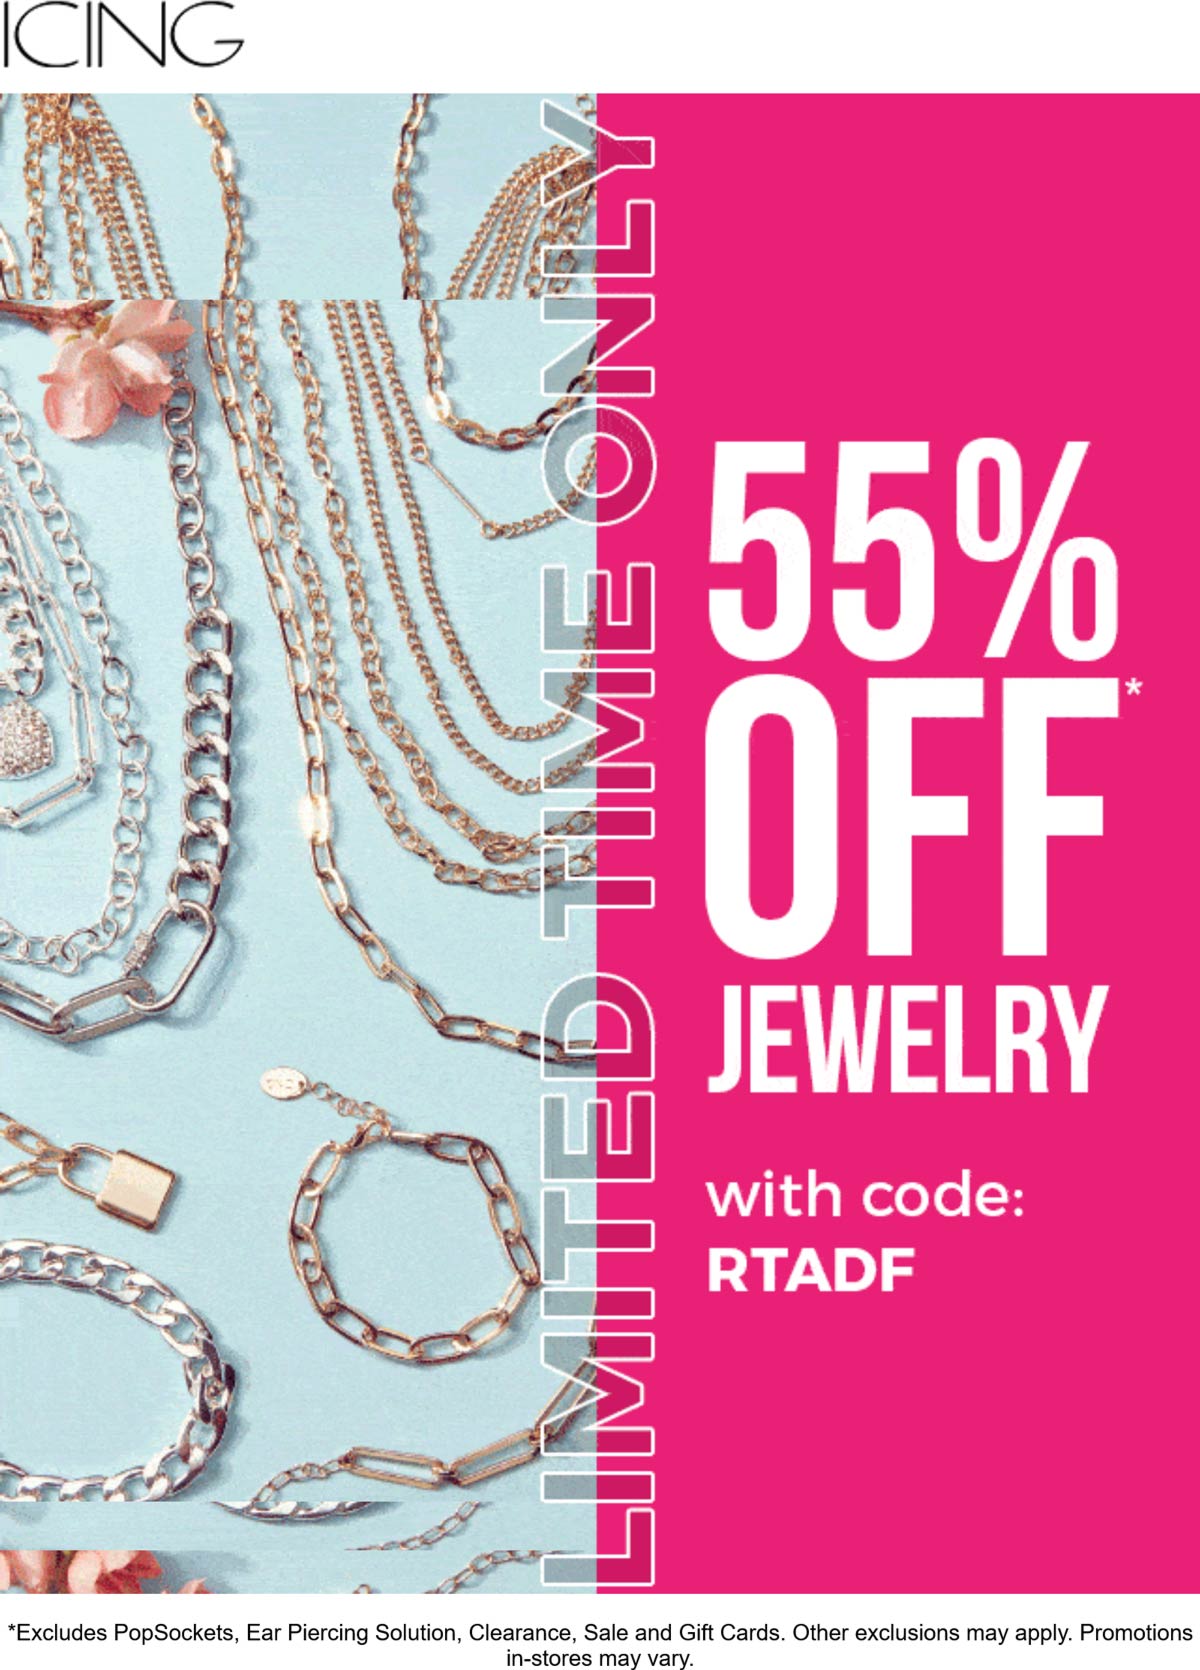 Icing stores Coupon  55% off jewelry at Icing via promo code RTADF #icing 